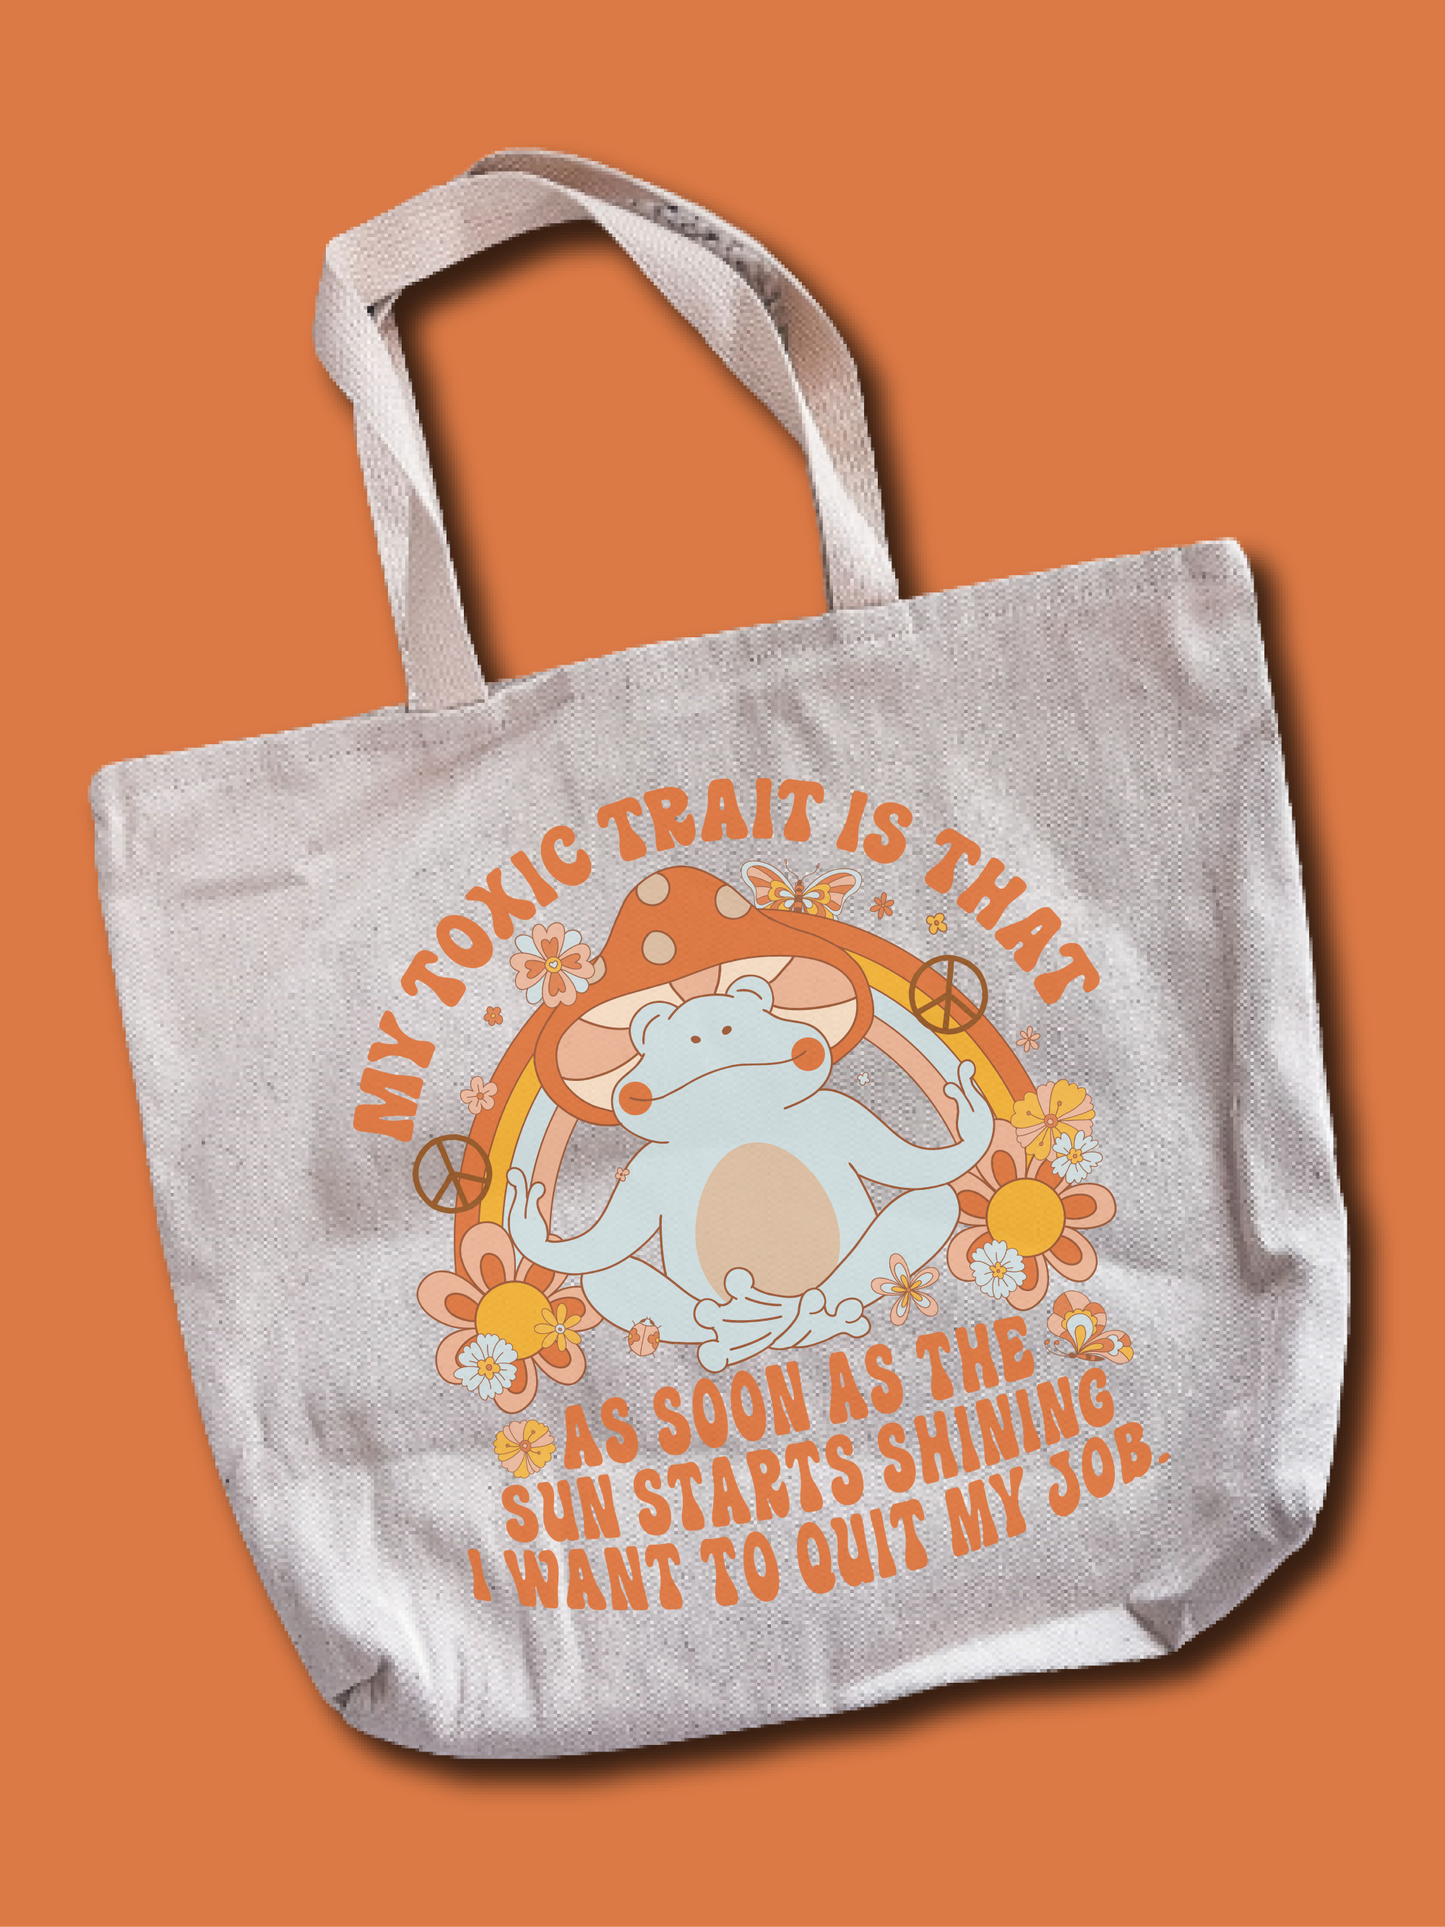 My Toxic Trait Is That As Soon As The Sun Starts Shining I Want To Quit My Job Tote Bag